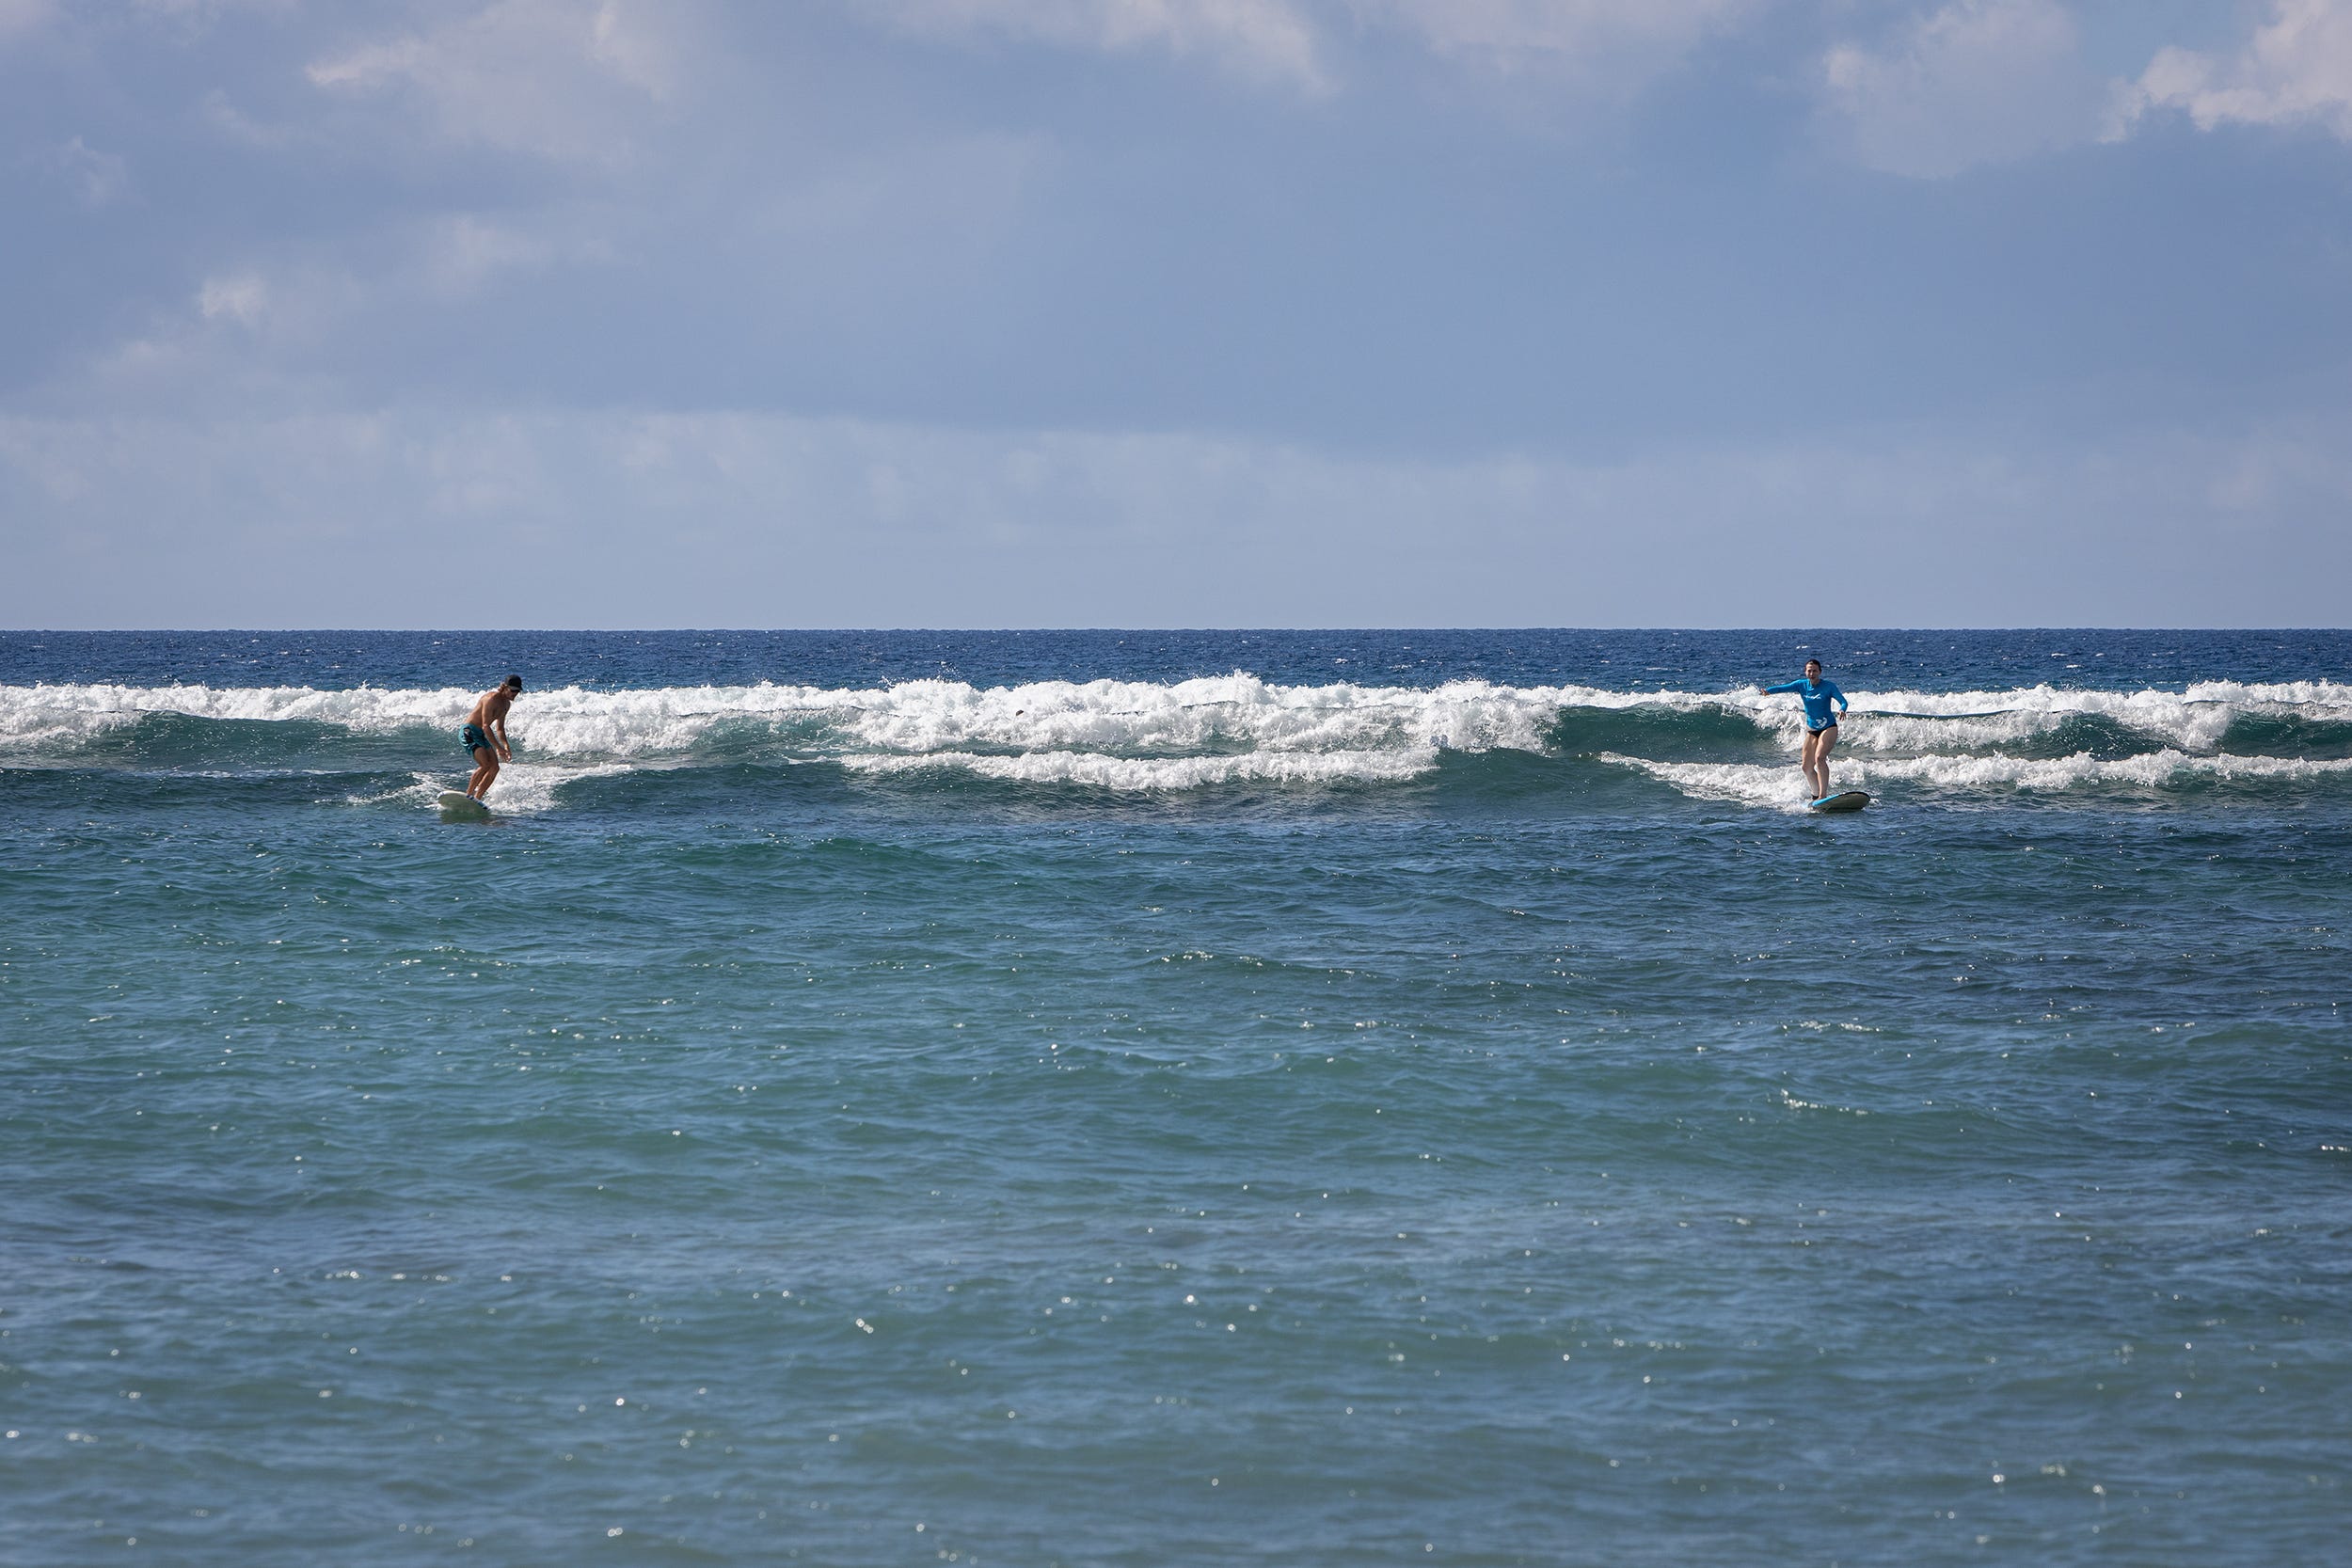 Two people surfing in the ocean.